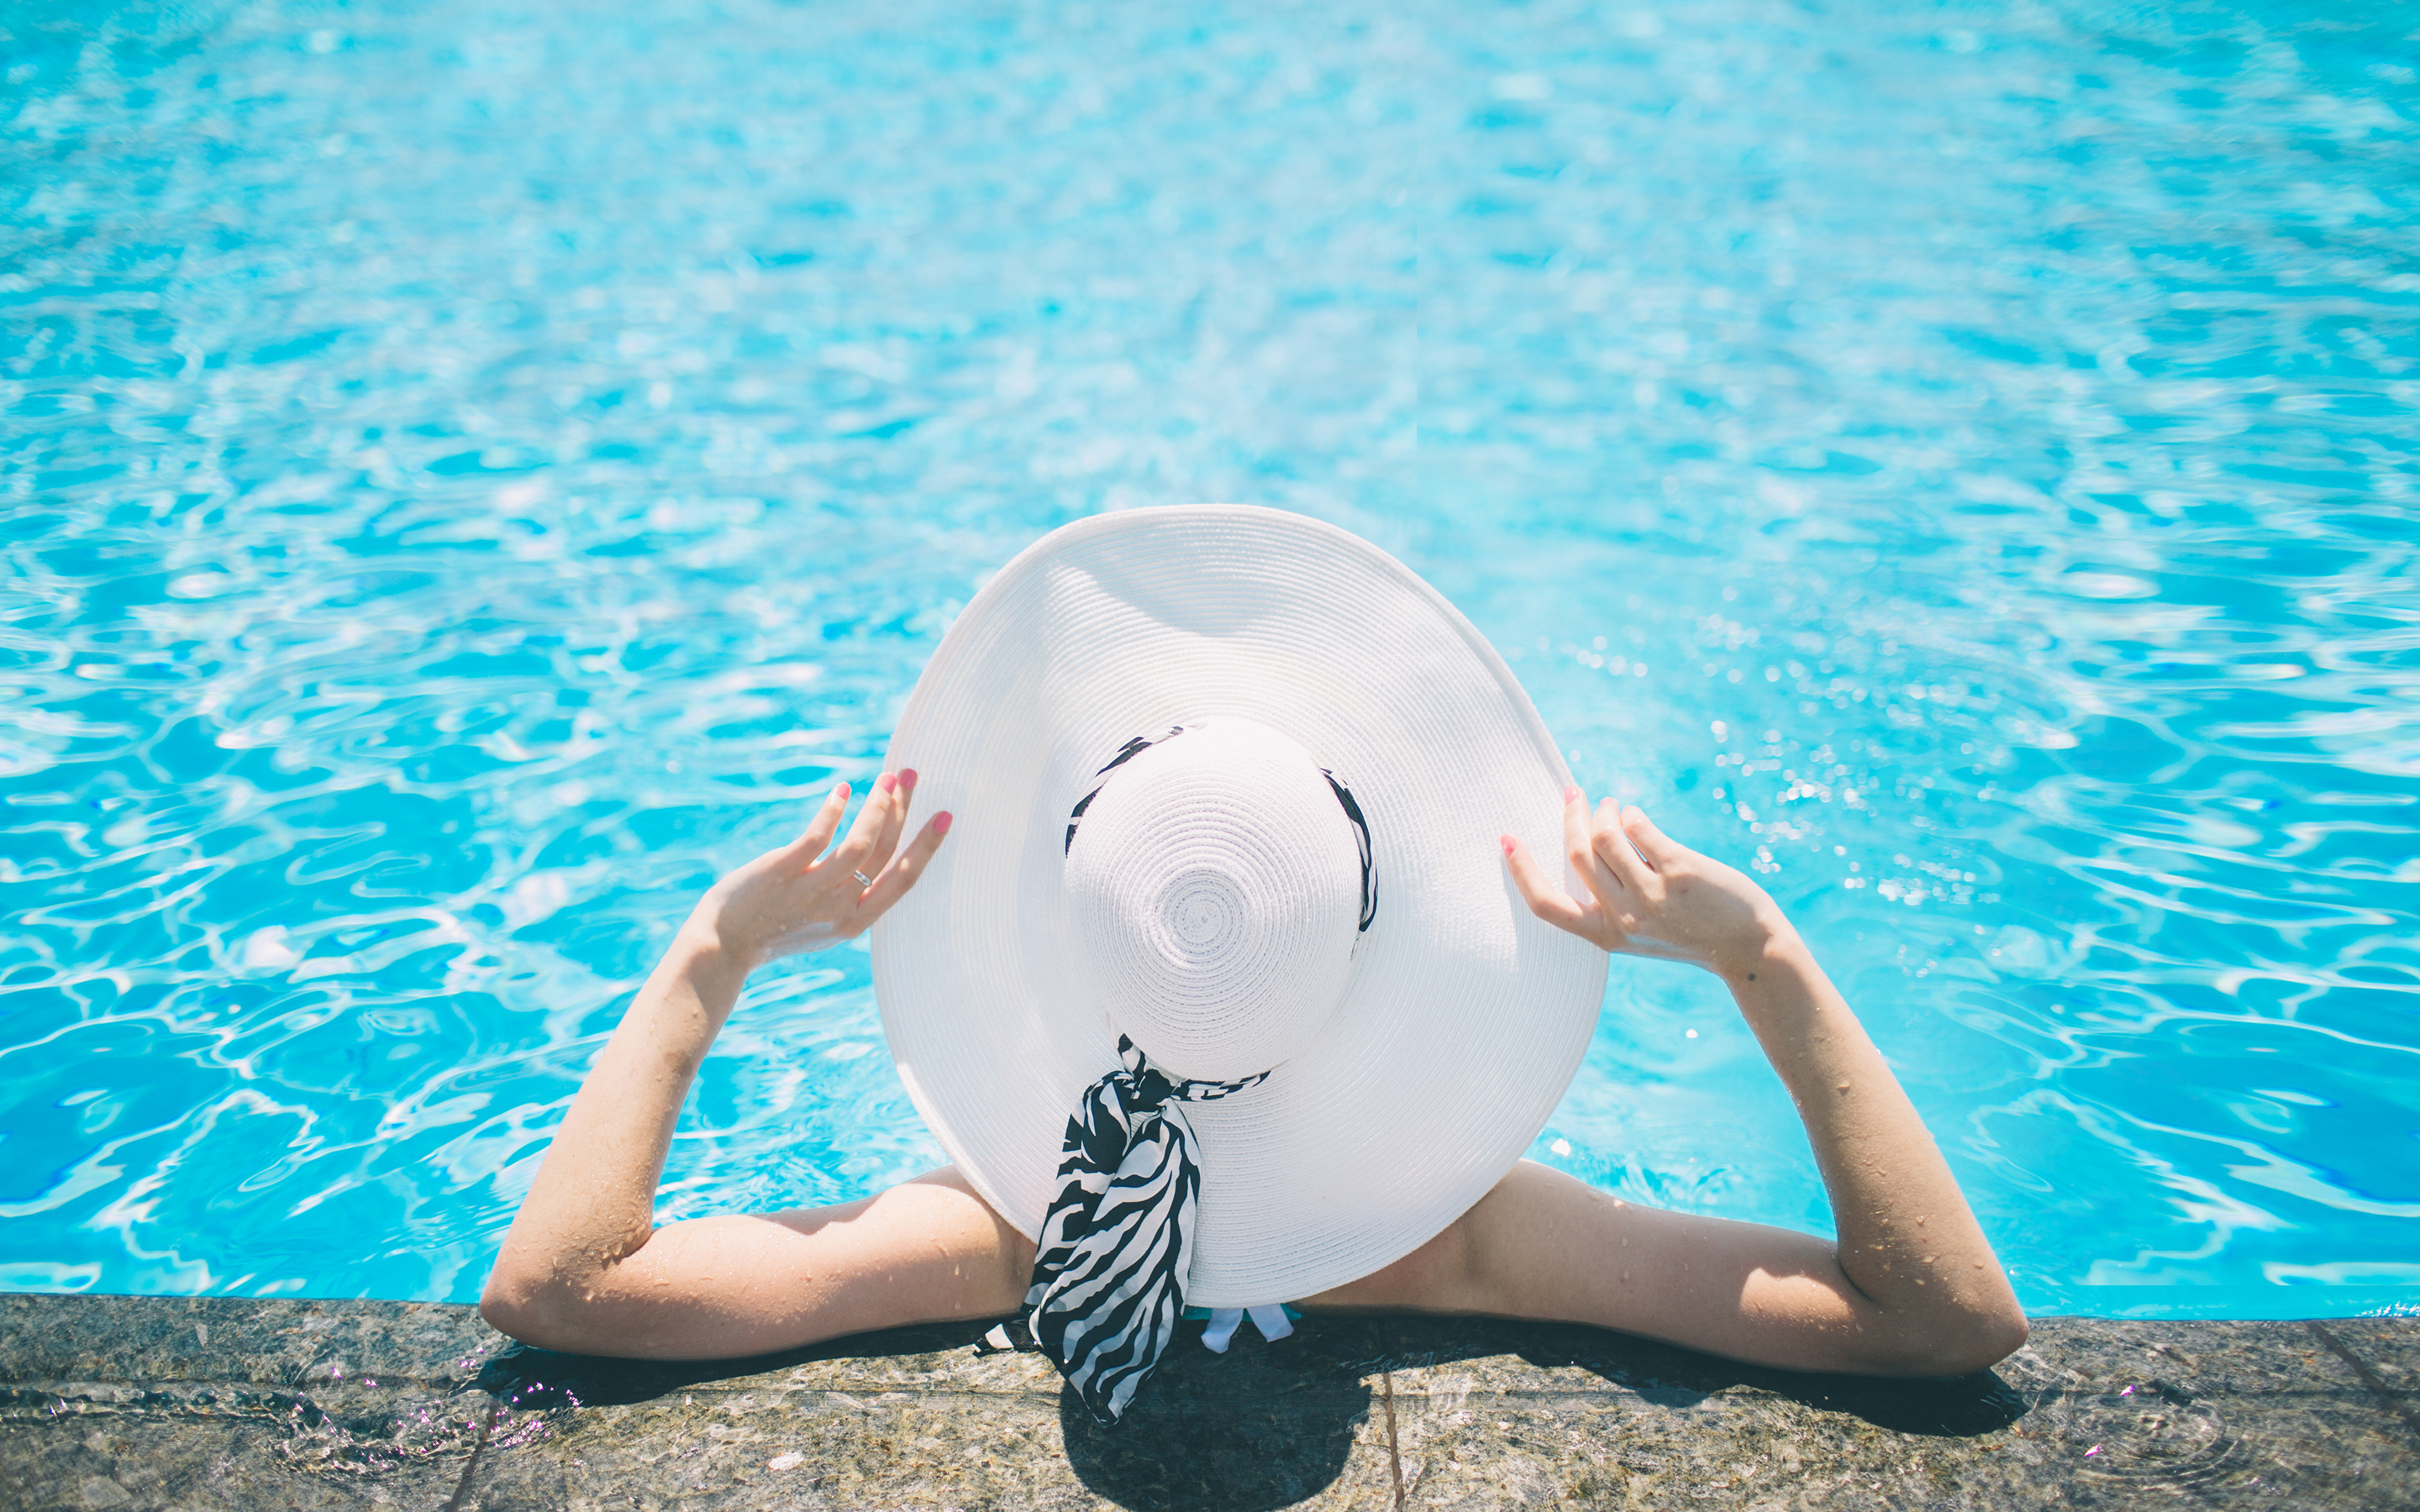 Woman lounging in the pool wearing a hat.